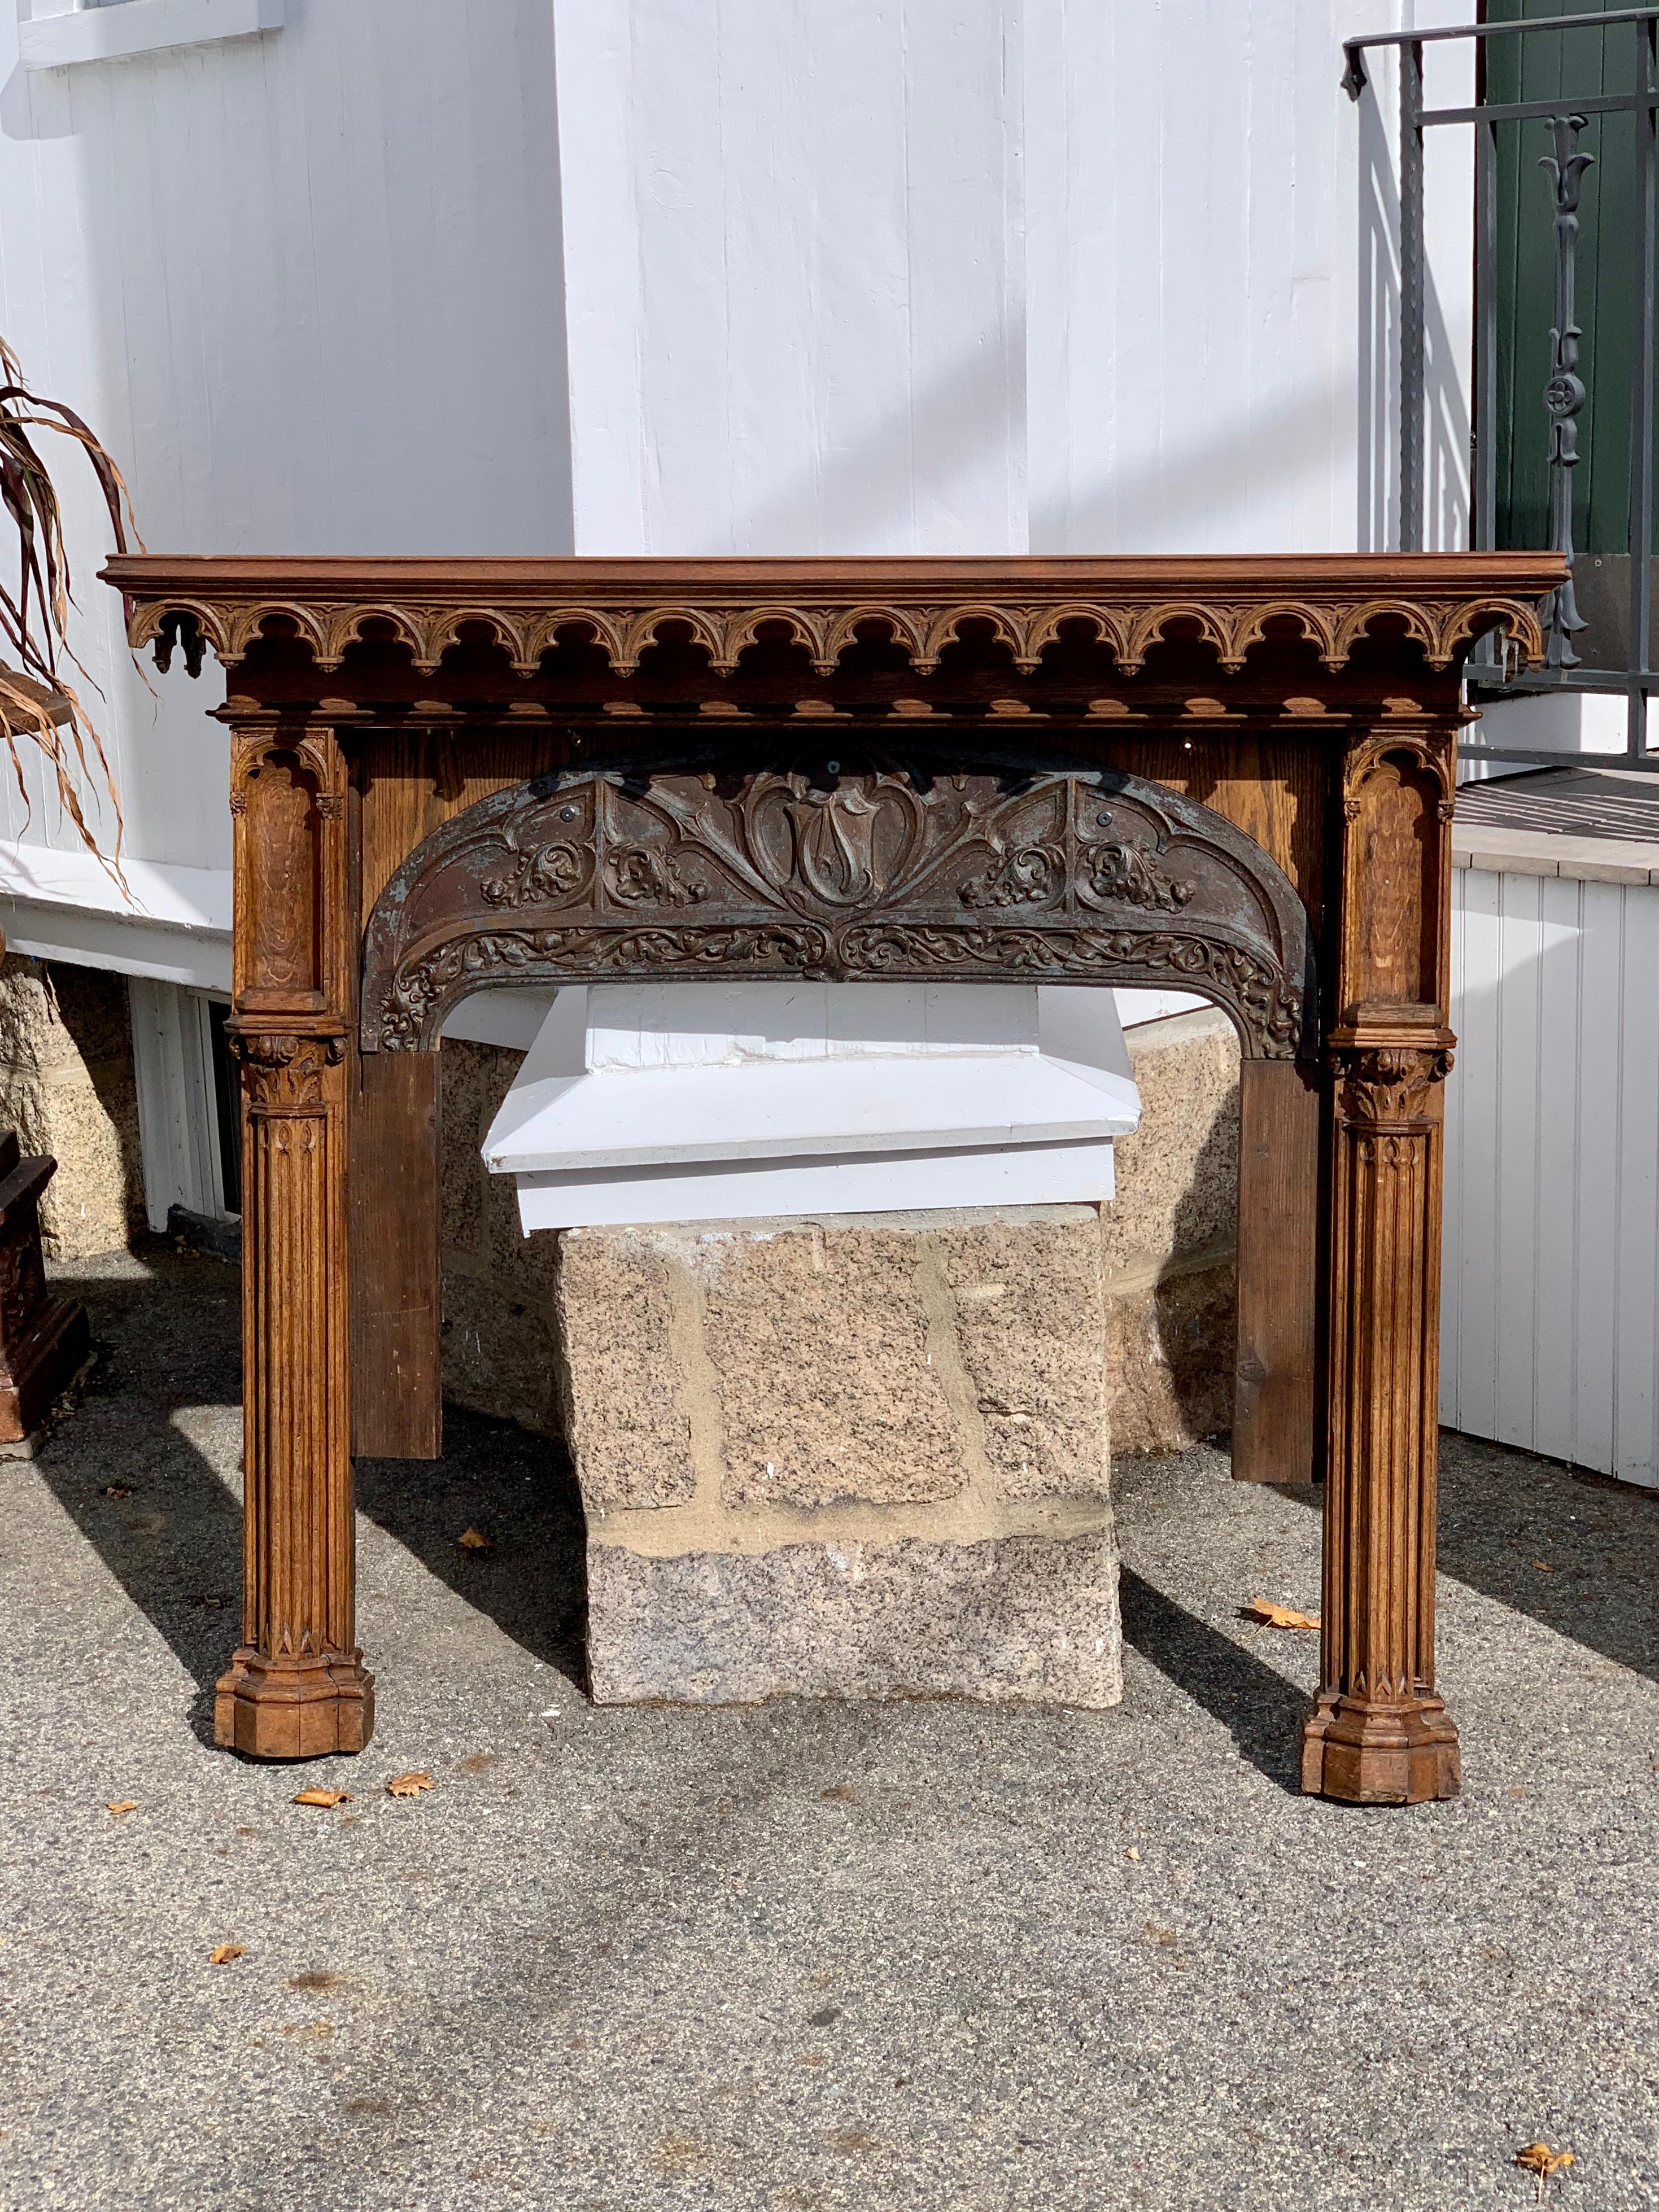 19th century Gothic fireplace in the Pugin style

Carved Gothic tracery in mantel frieze. Nicely carved with niches and Gothic columns. Inset iron Gothic arch under frieze. Wonderful usable size.

Measurements: Outside: 59